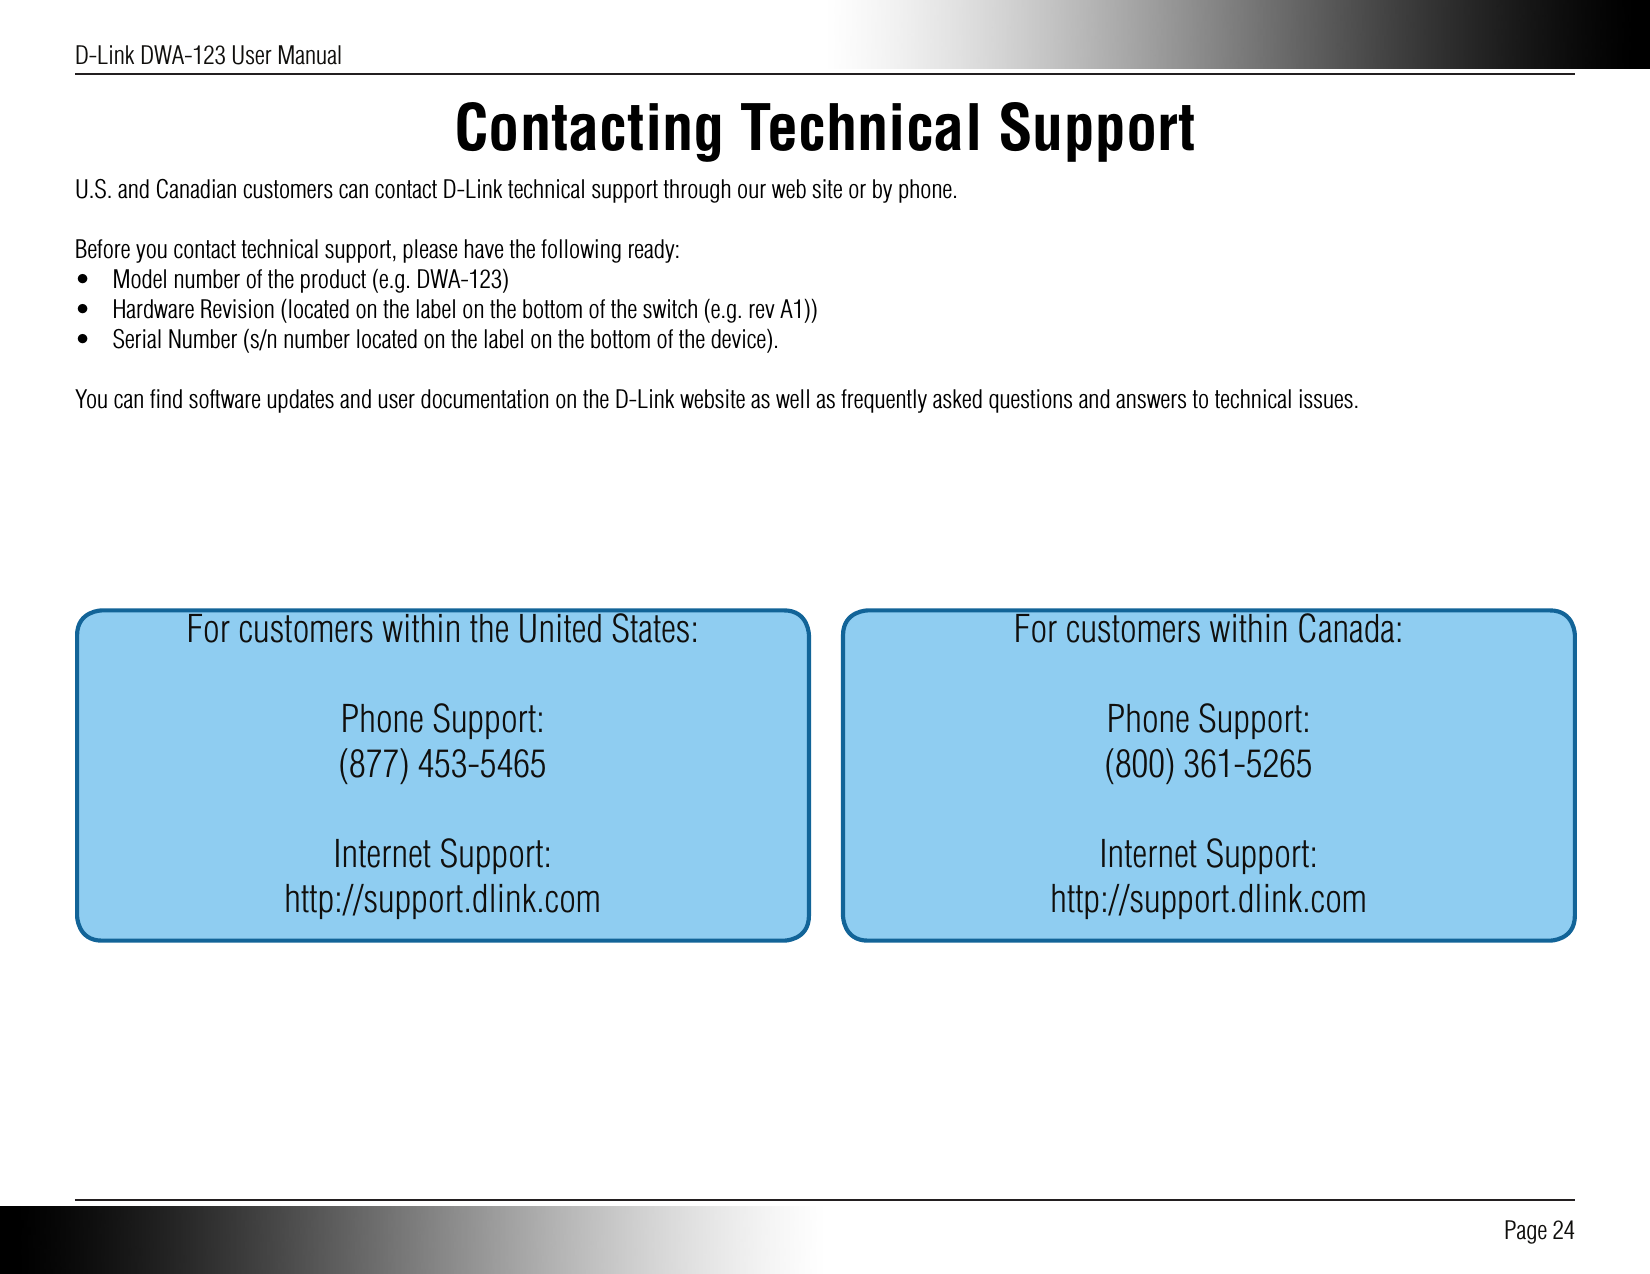 D-Link DWA-123 User Manual Page 24Contacting Technical SupportU.S. and Canadian customers can contact D-Link technical support through our web site or by phone.Before you contact technical support, please have the following ready:•  Model number of the product (e.g. DWA-123)•  Hardware Revision (located on the label on the bottom of the switch (e.g. rev A1))•  Serial Number (s/n number located on the label on the bottom of the device).You can ﬁnd software updates and user documentation on the D-Link website as well as frequently asked questions and answers to technical issues.For customers within the United States:Phone Support:(877) 453-5465Internet Support:http://support.dlink.comFor customers within Canada:Phone Support:(800) 361-5265Internet Support:http://support.dlink.com